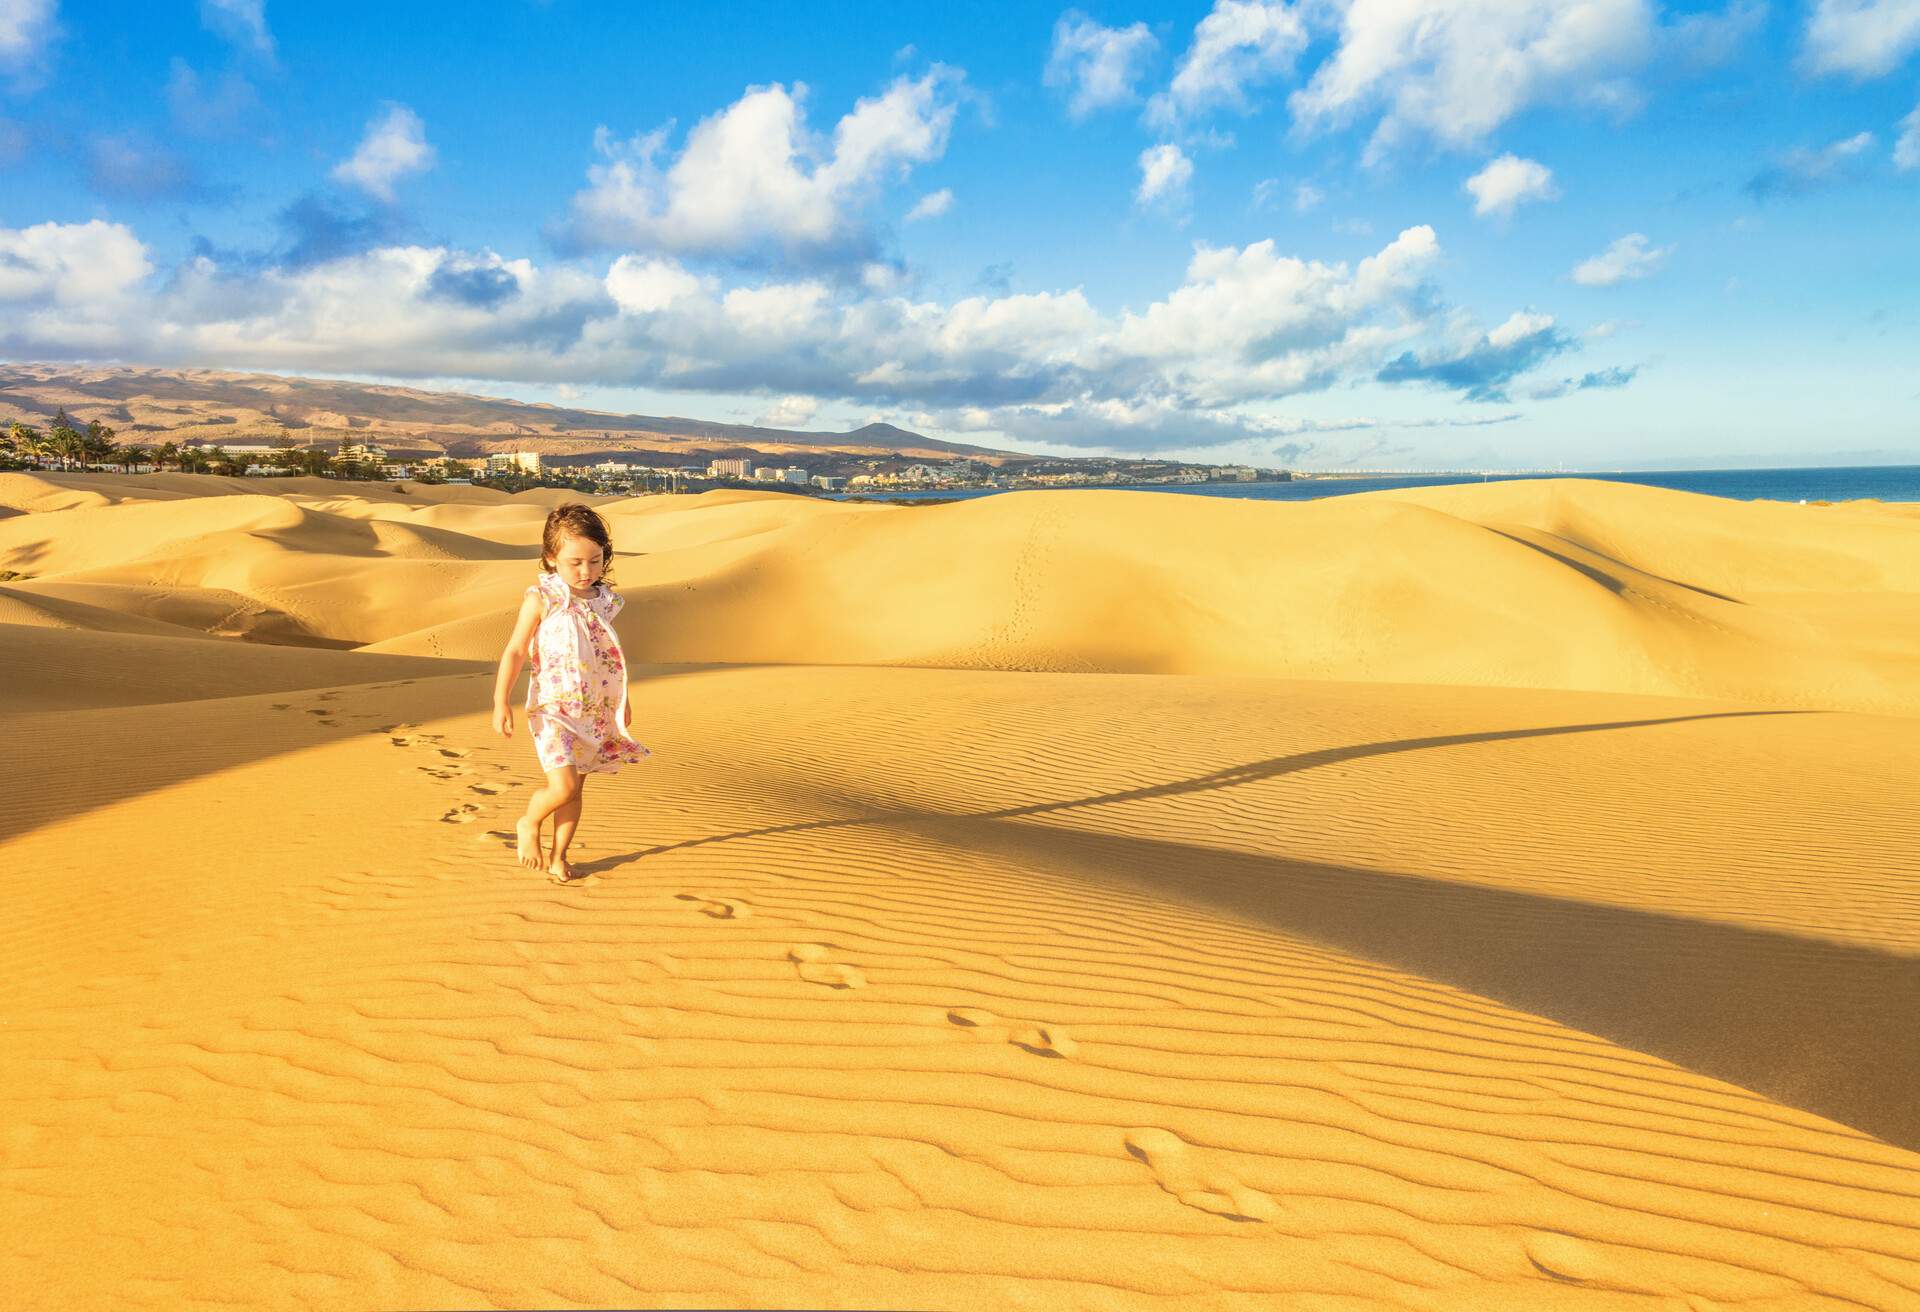 DEST_SPAIN_CANARY-ISLANDS_GRAN-CANARIA_MASPALOMAS_THEME_CHILD_GettyImages-481259183